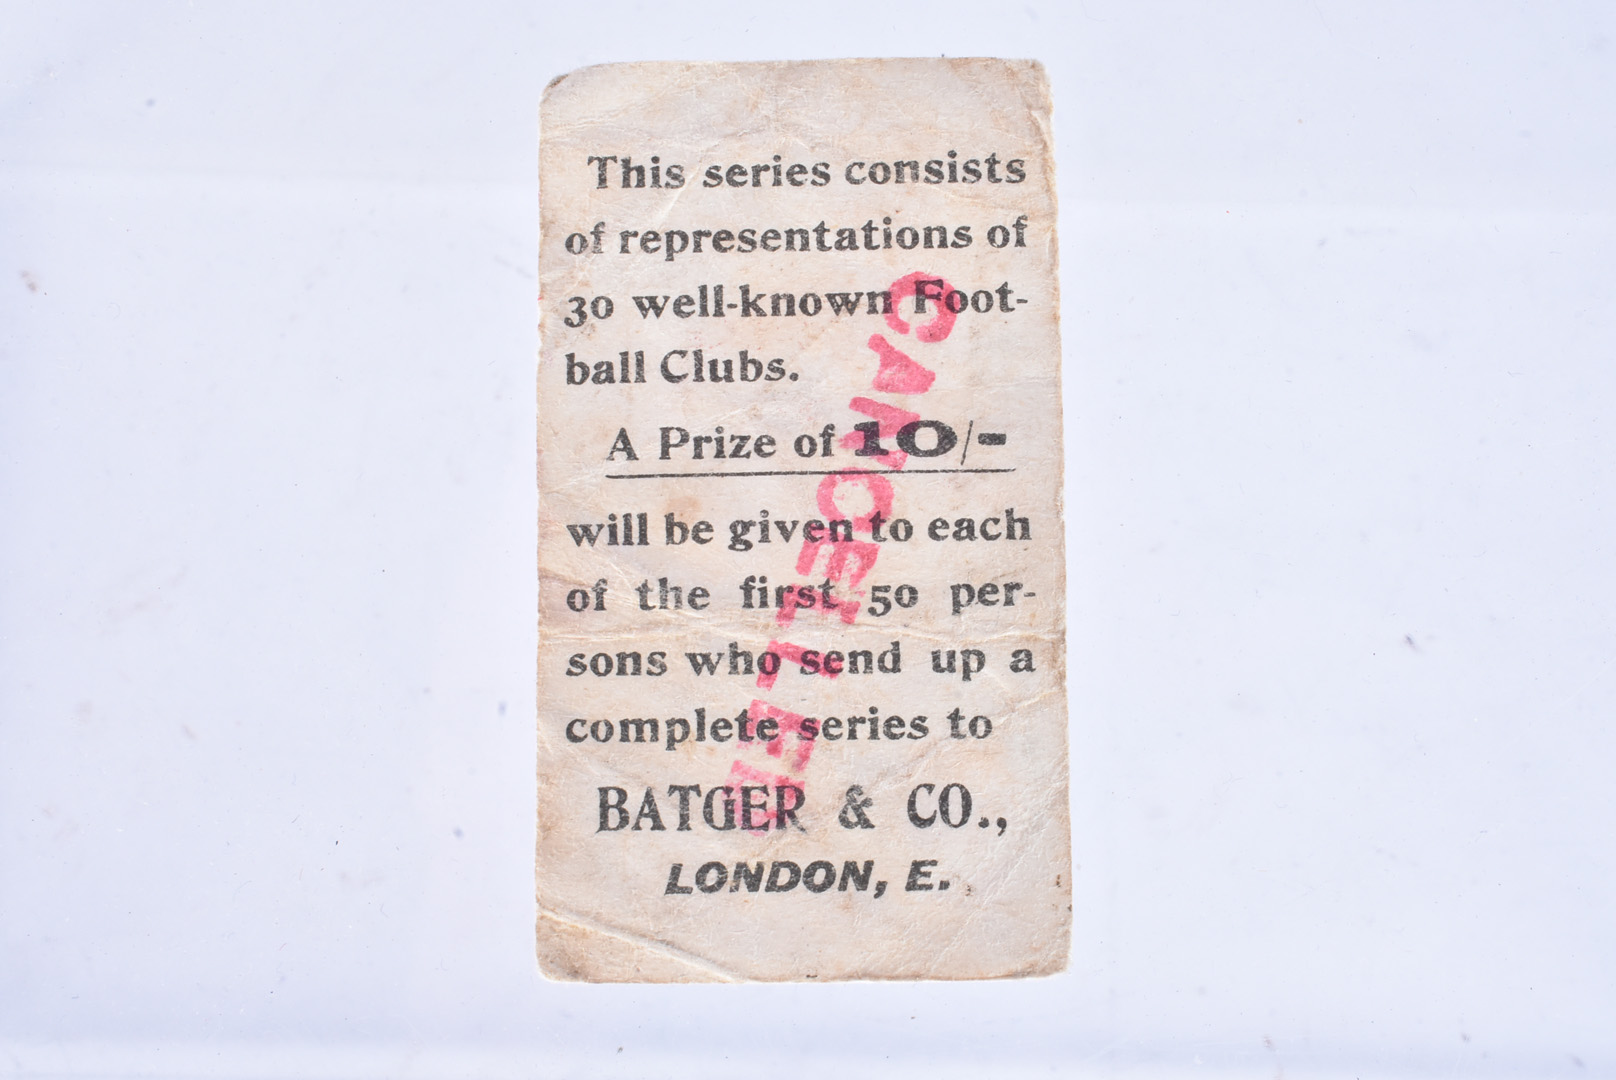 Batger & Co, Football Clubs, No.28, Liverpool FC, stamped Cancelled in red to back, poor - Image 6 of 6